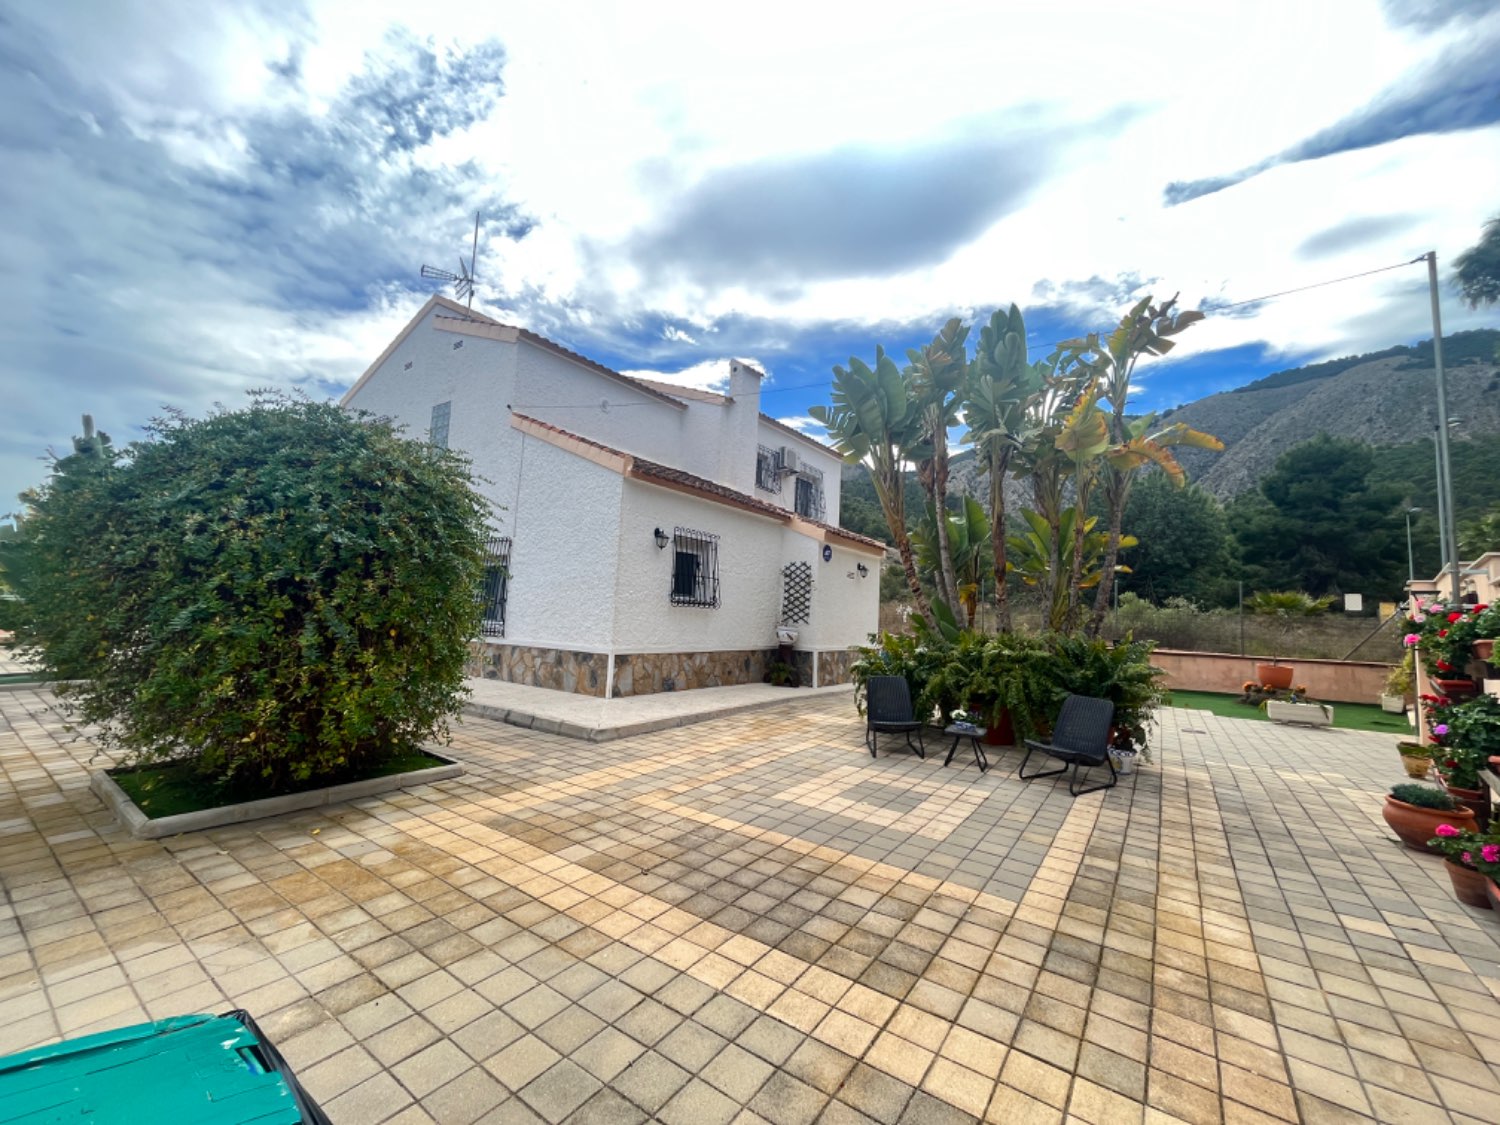 Villa located in Montepinar with more than 1400m2 plot, 4 bedrooms and 2 bathrooms.